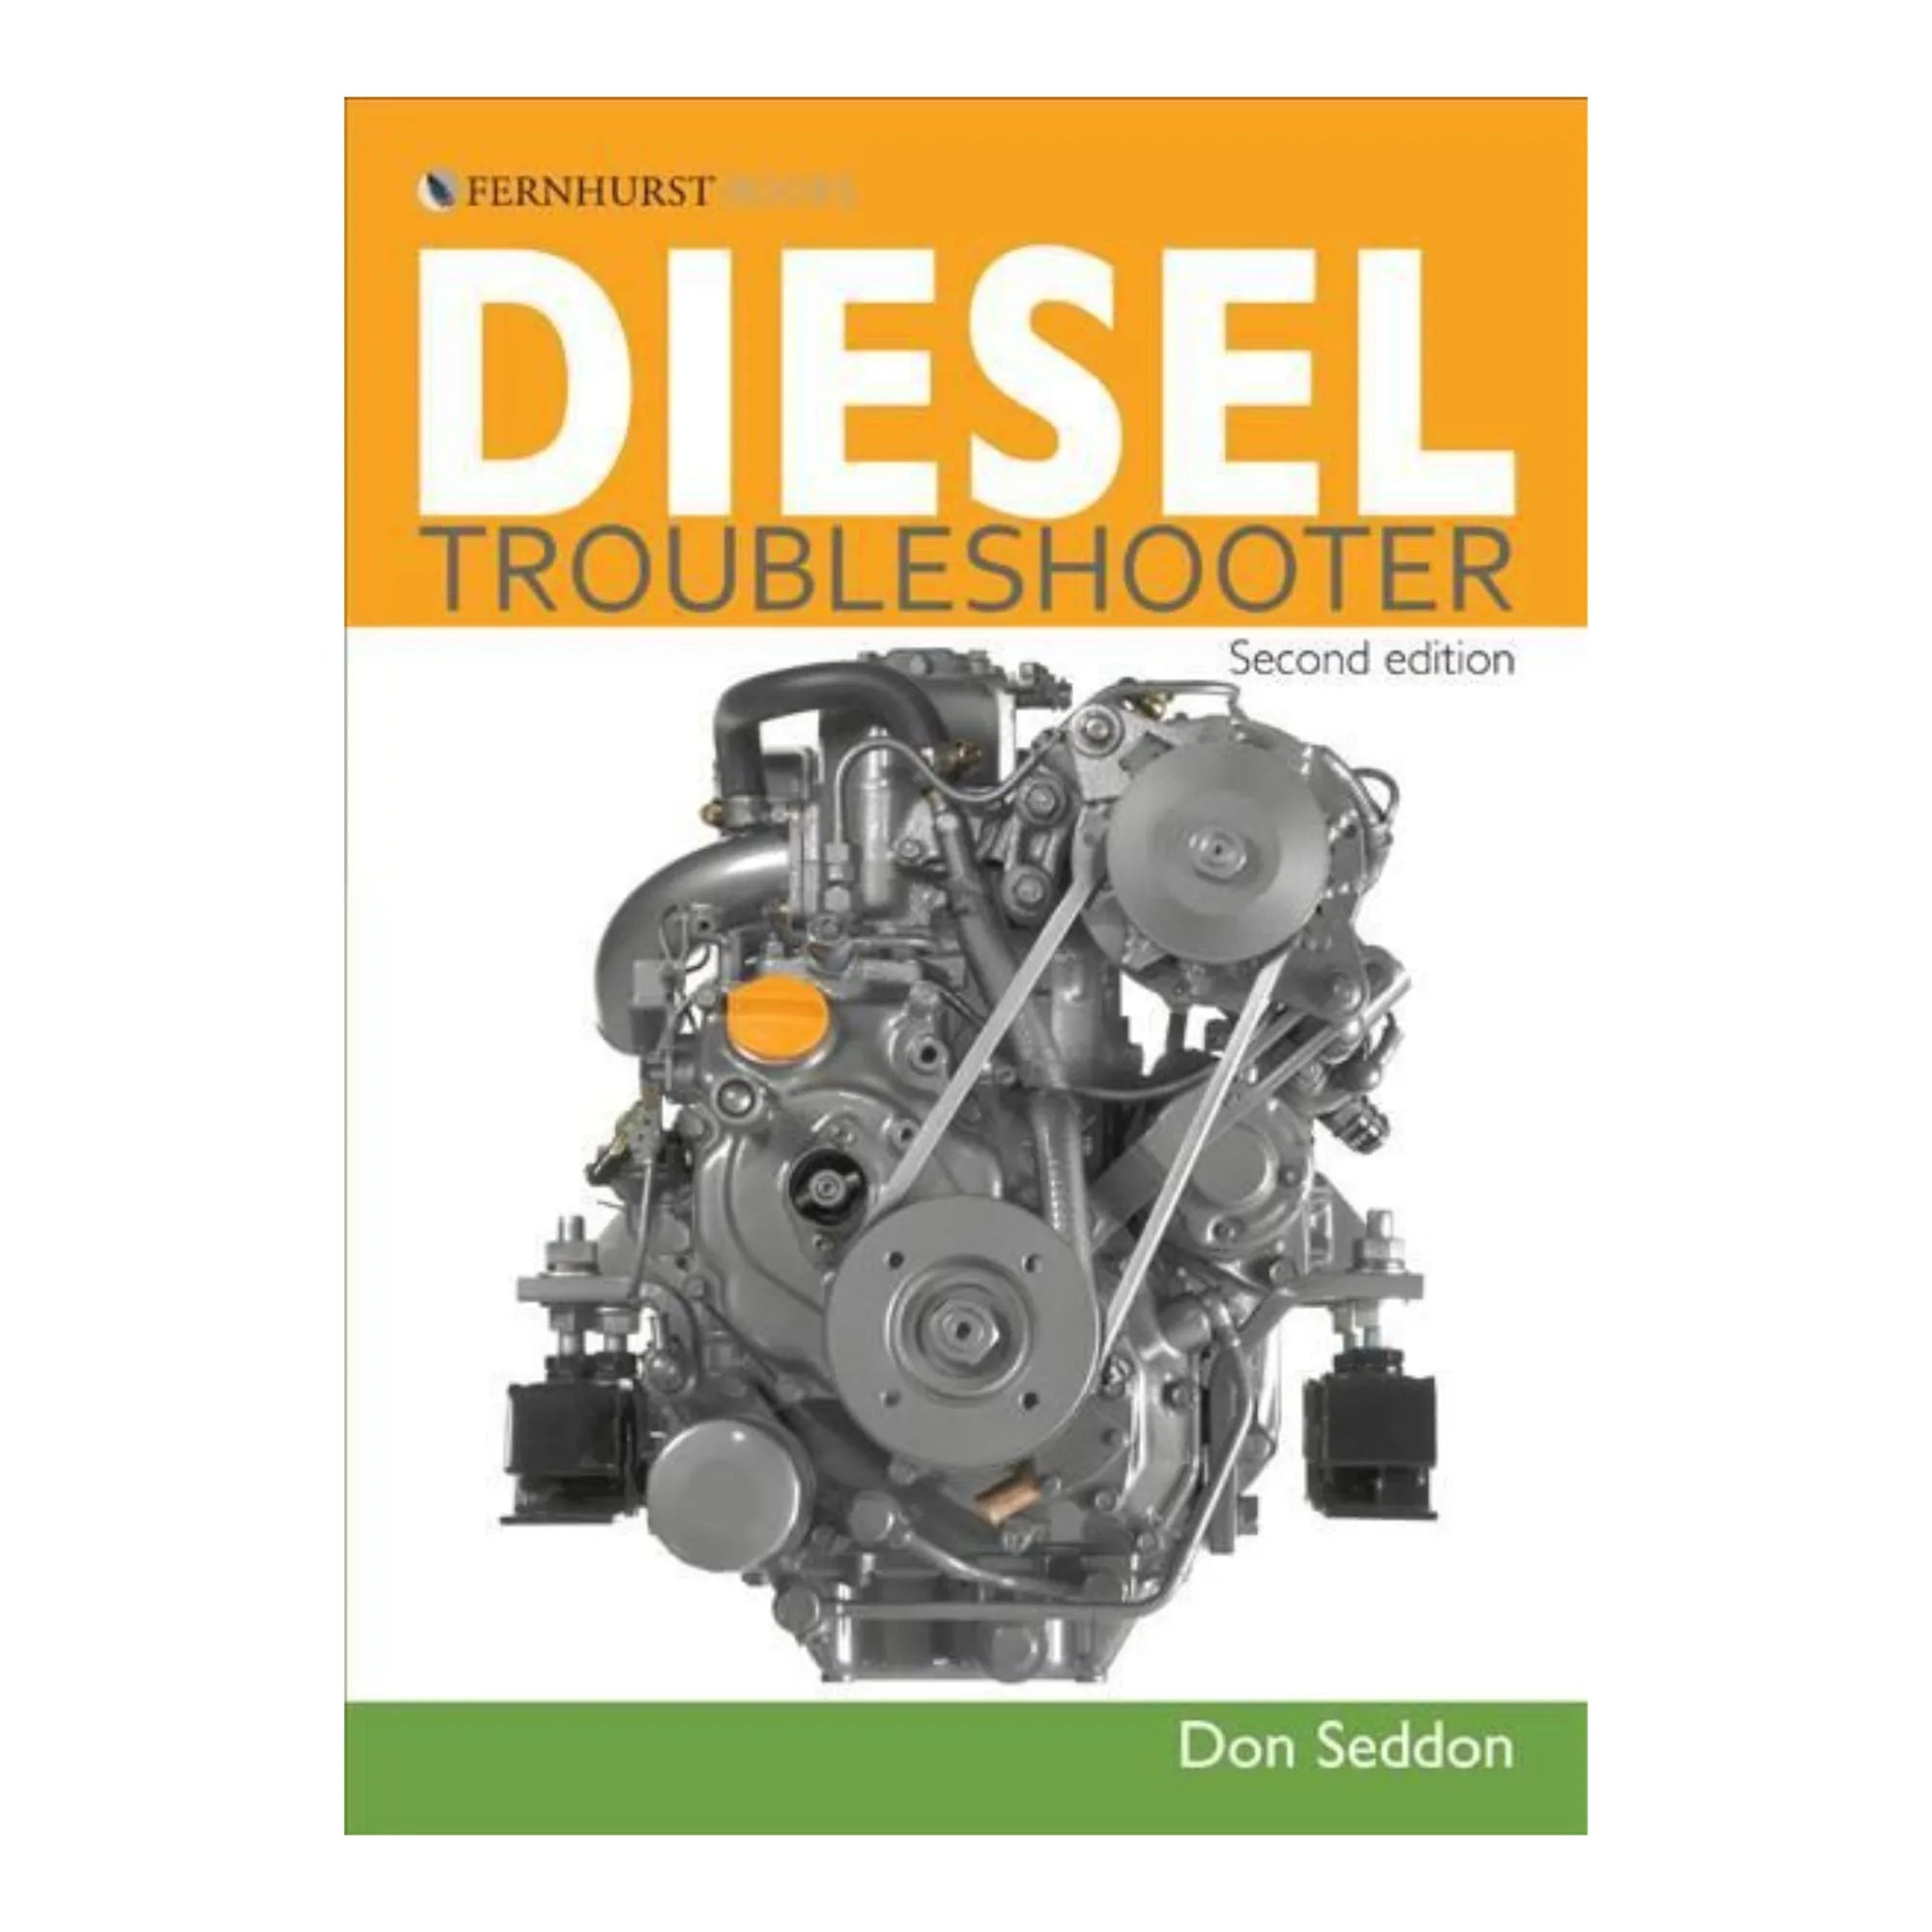 Diesel Troubleshooter (2nd Edition)